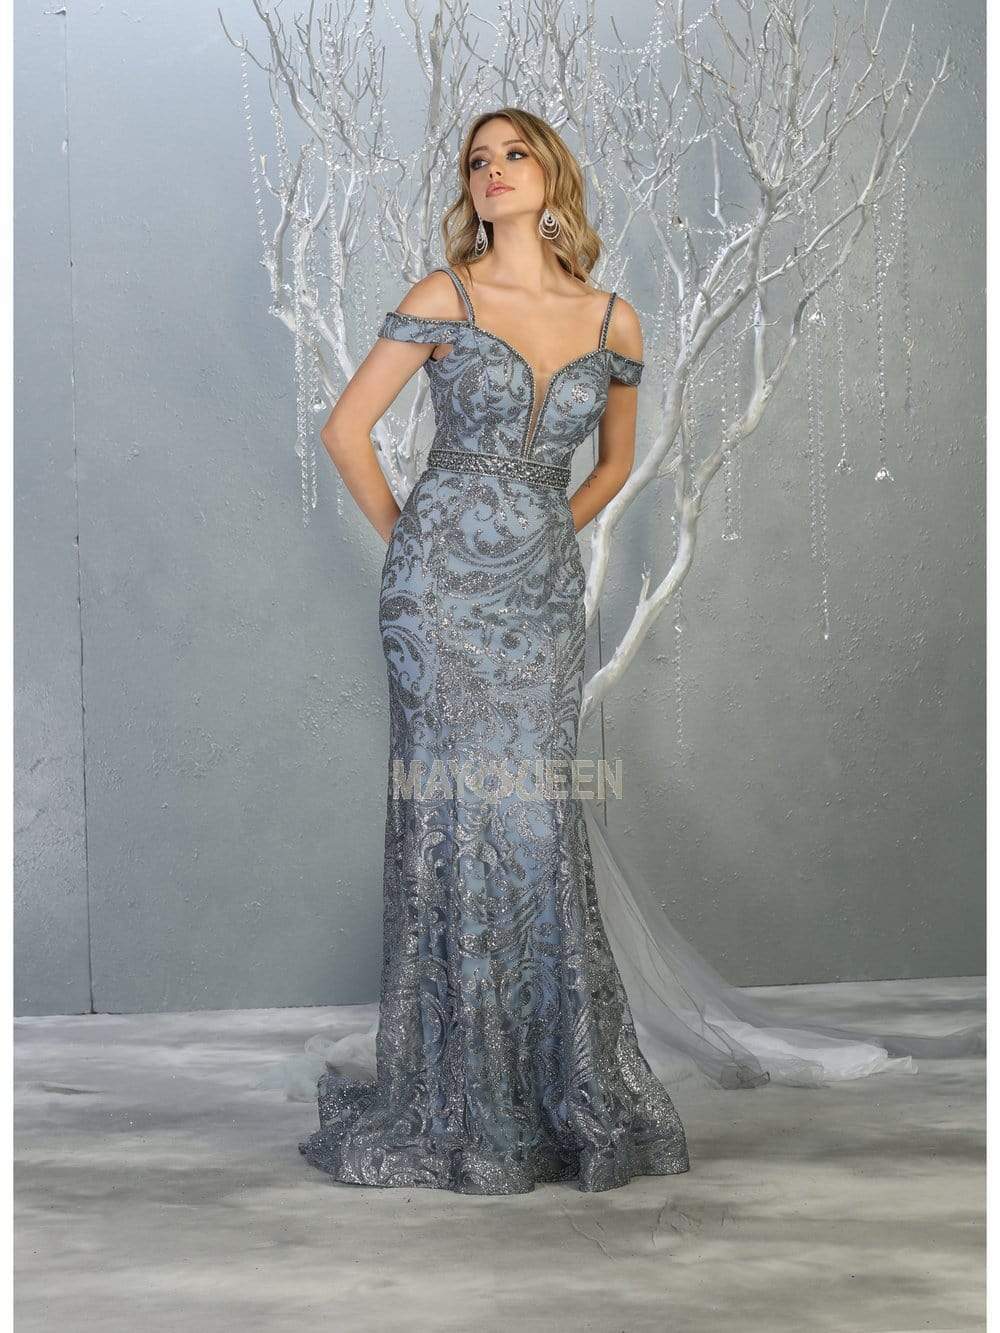 May Queen - RQ7830 Plunging Off-Shoulder Trumpet Dress Evening Dresses 4 / Dusty-Blue